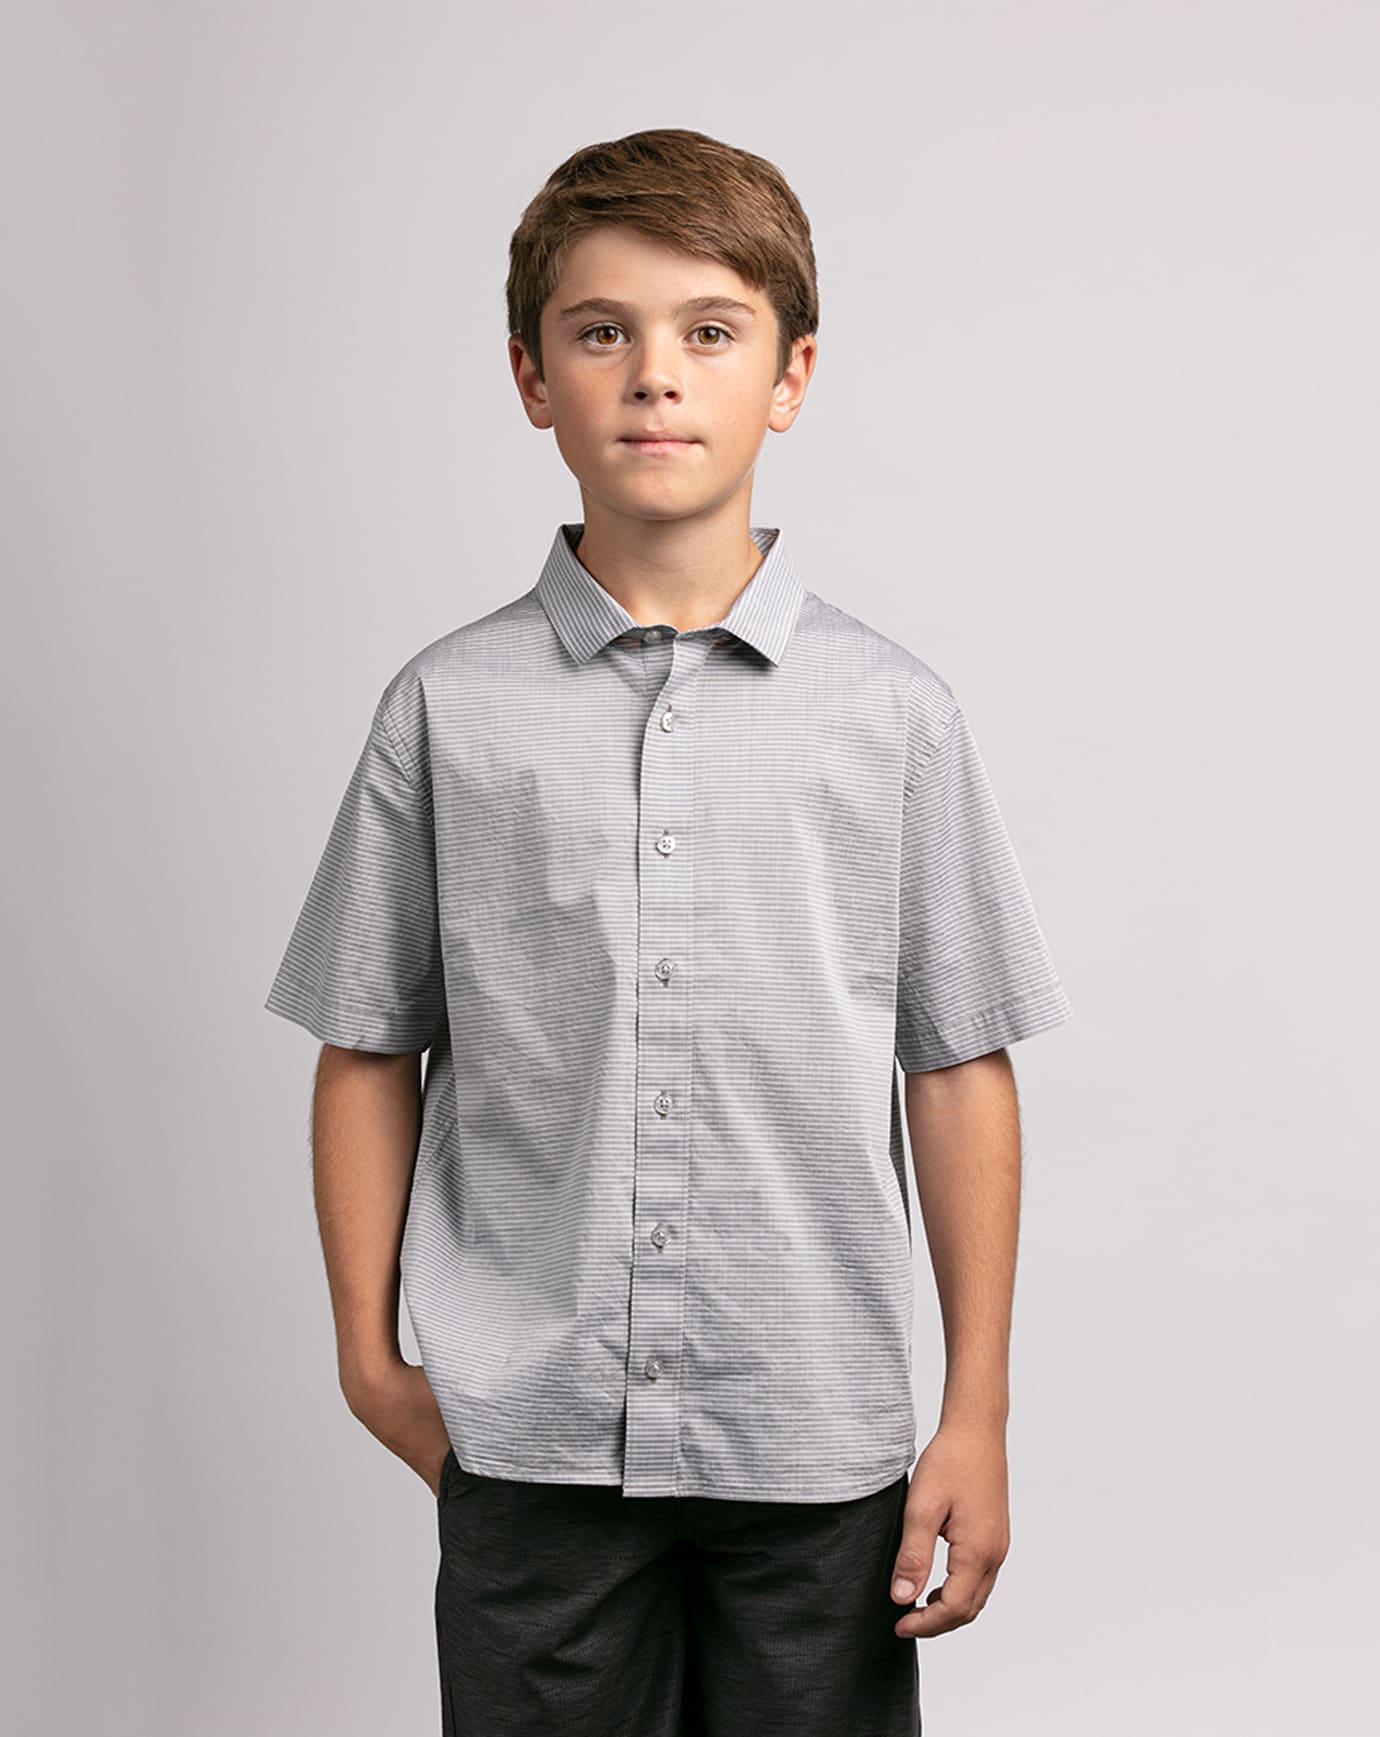 THE TAKE AWAY YOUTH BUTTON-UP